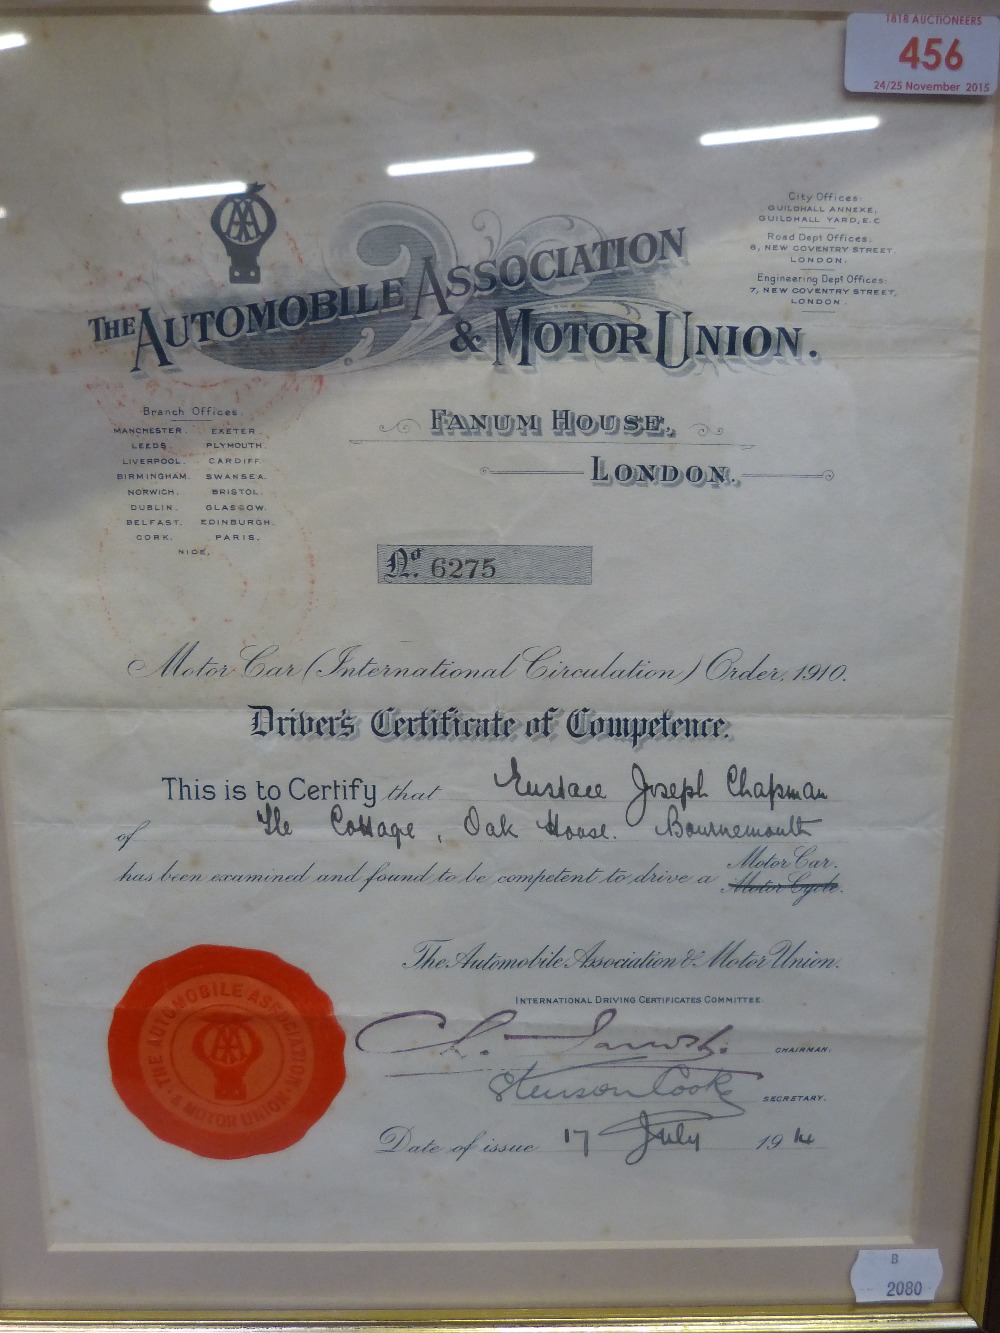 A framed Drivers Certificate of Competence for The Automobile Association and Motor Union 1914